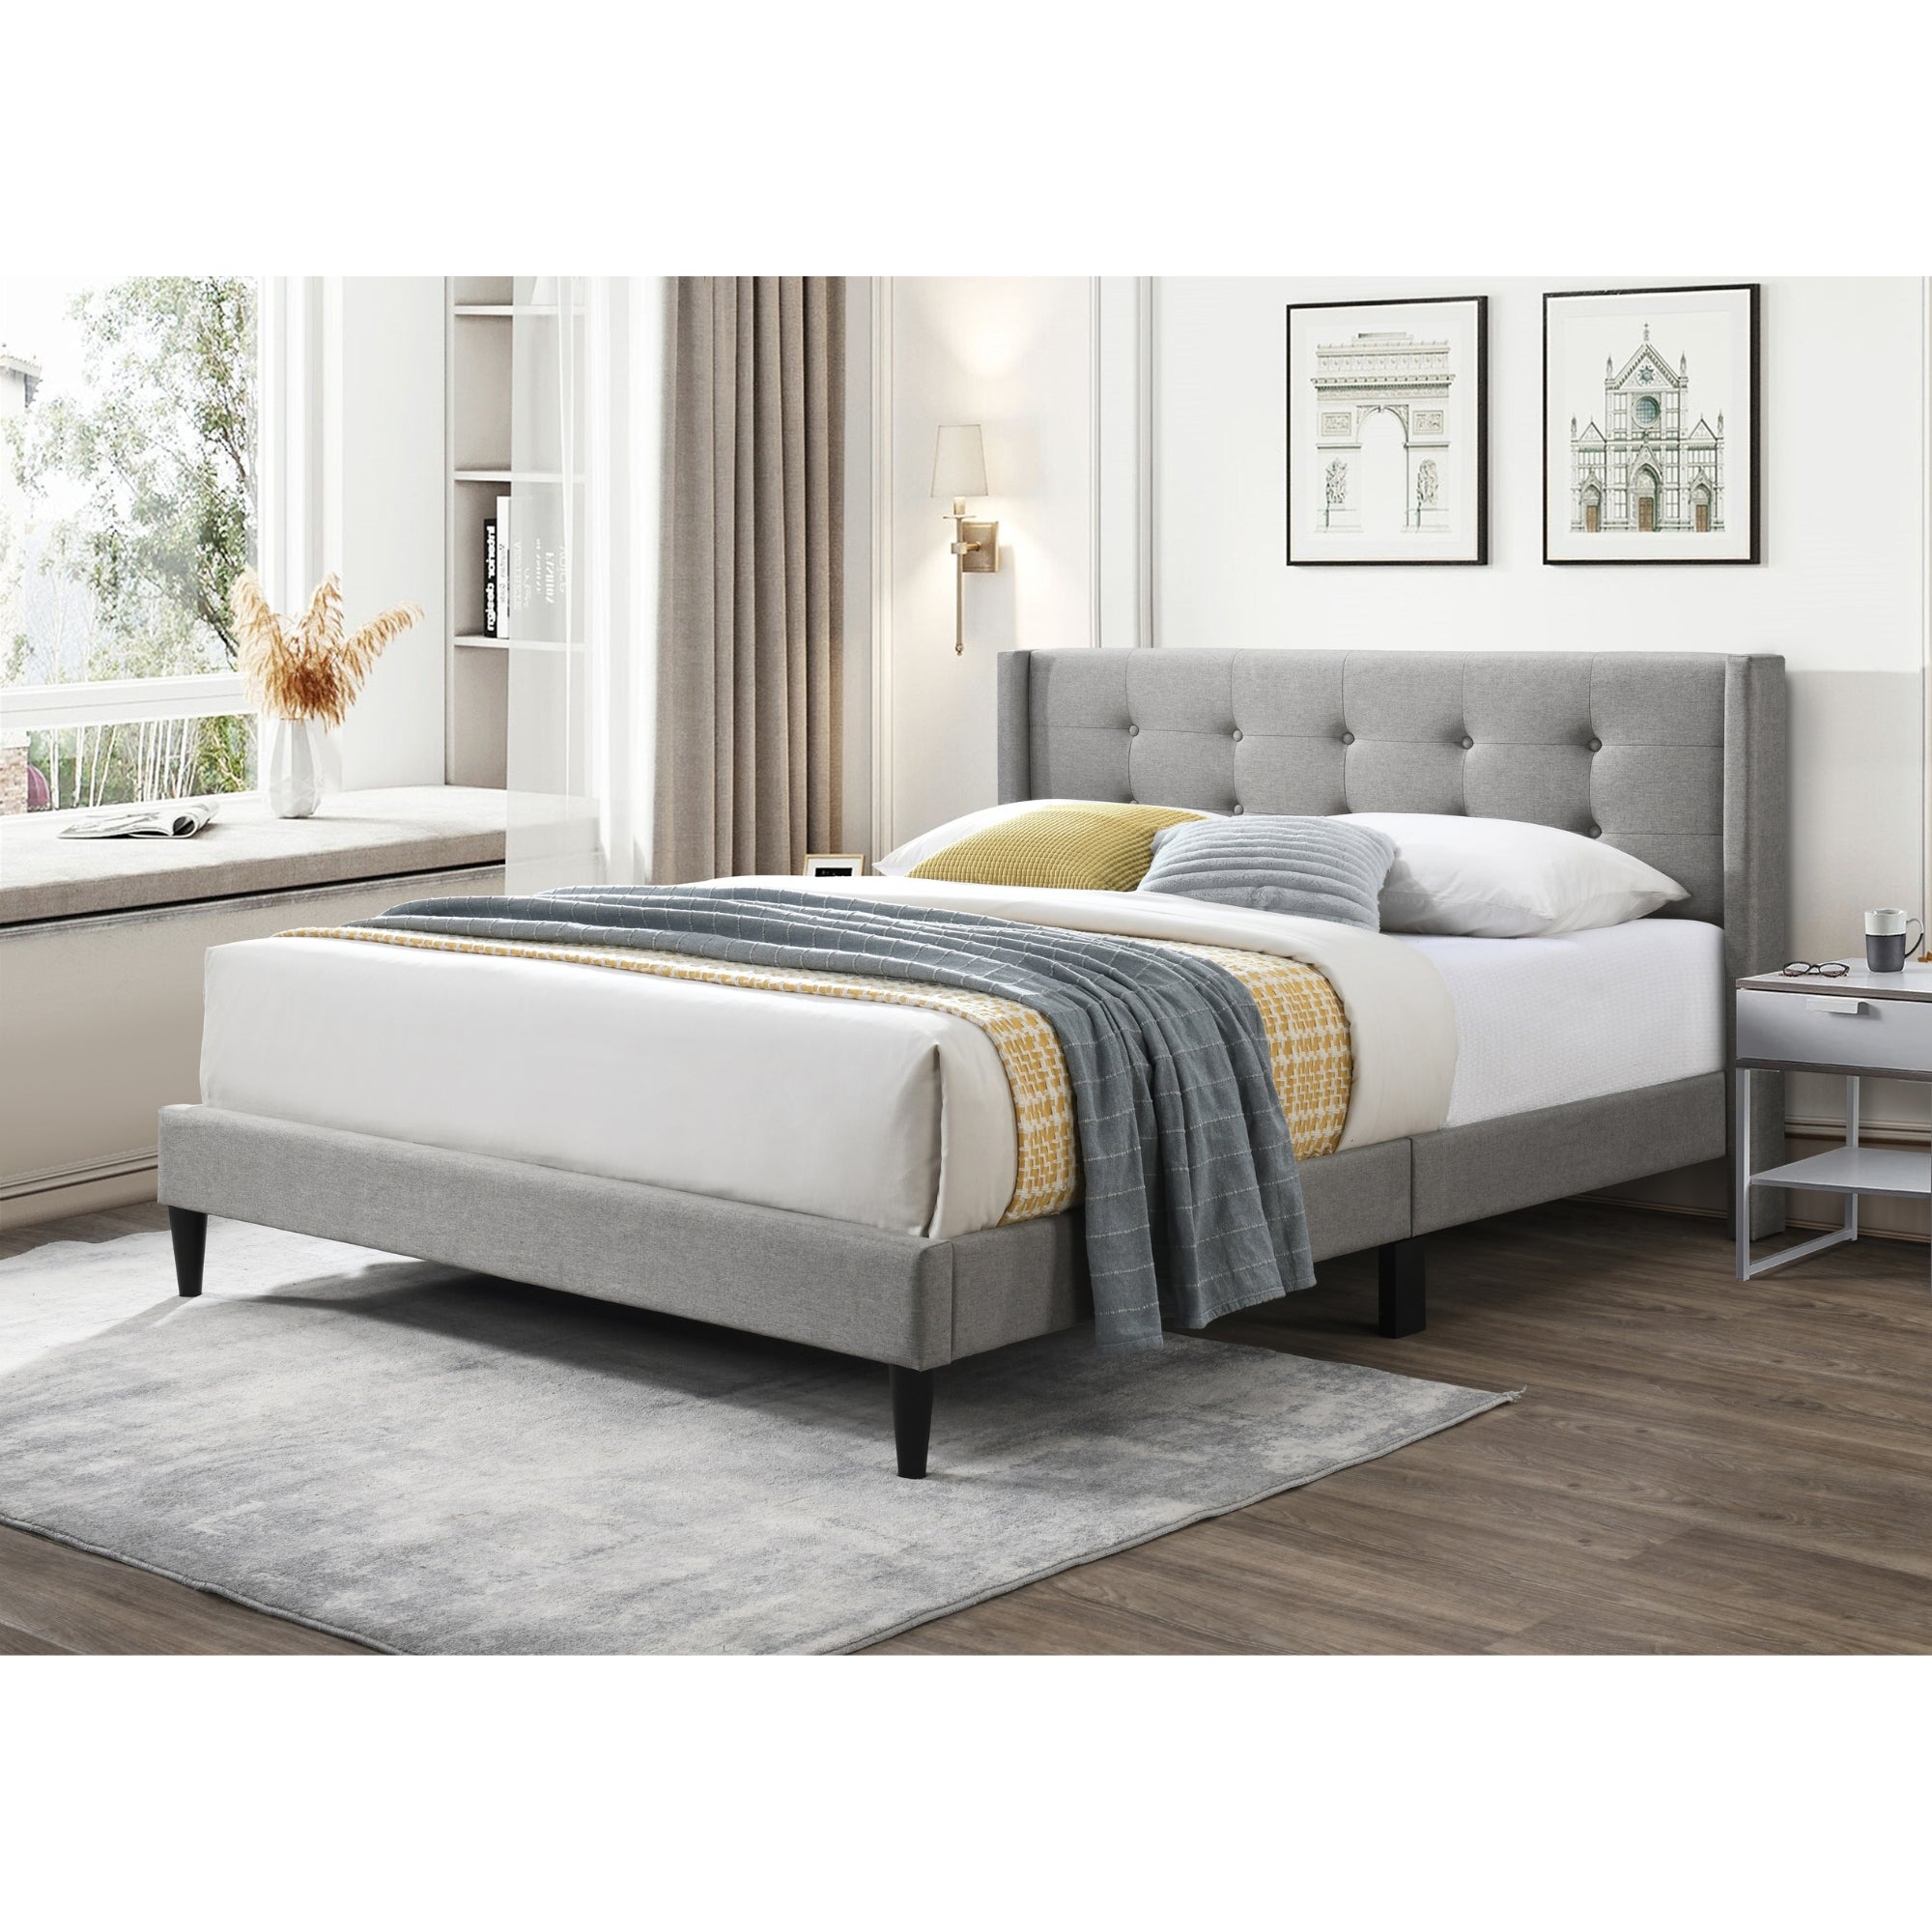 Light Grey Queen Bed with Tufted Headboard, MDF Wood